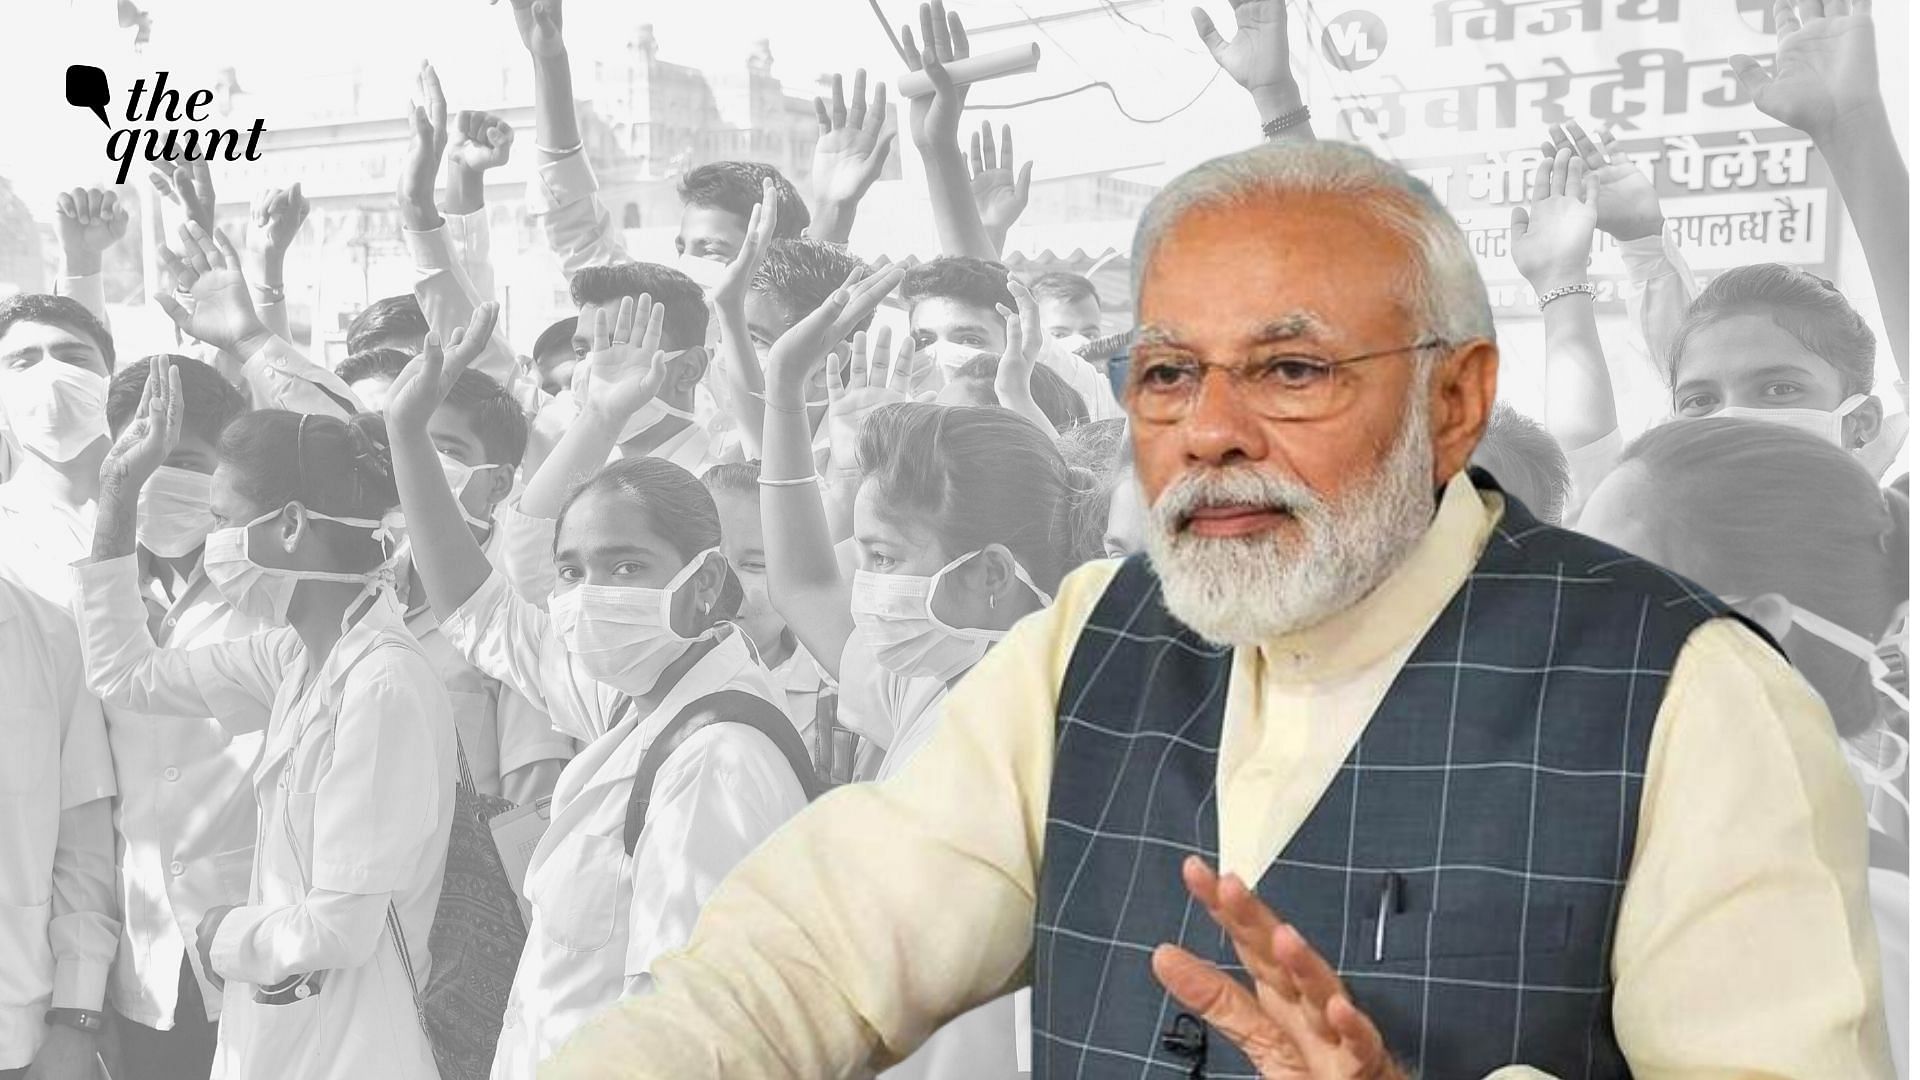 Prime Minister Narendra Modi on WWednesday, 25 March, interacted with the people of his parliamentary constituency of Varanasi amid nationwide lockdown in the wake of coronavirus outbreak.